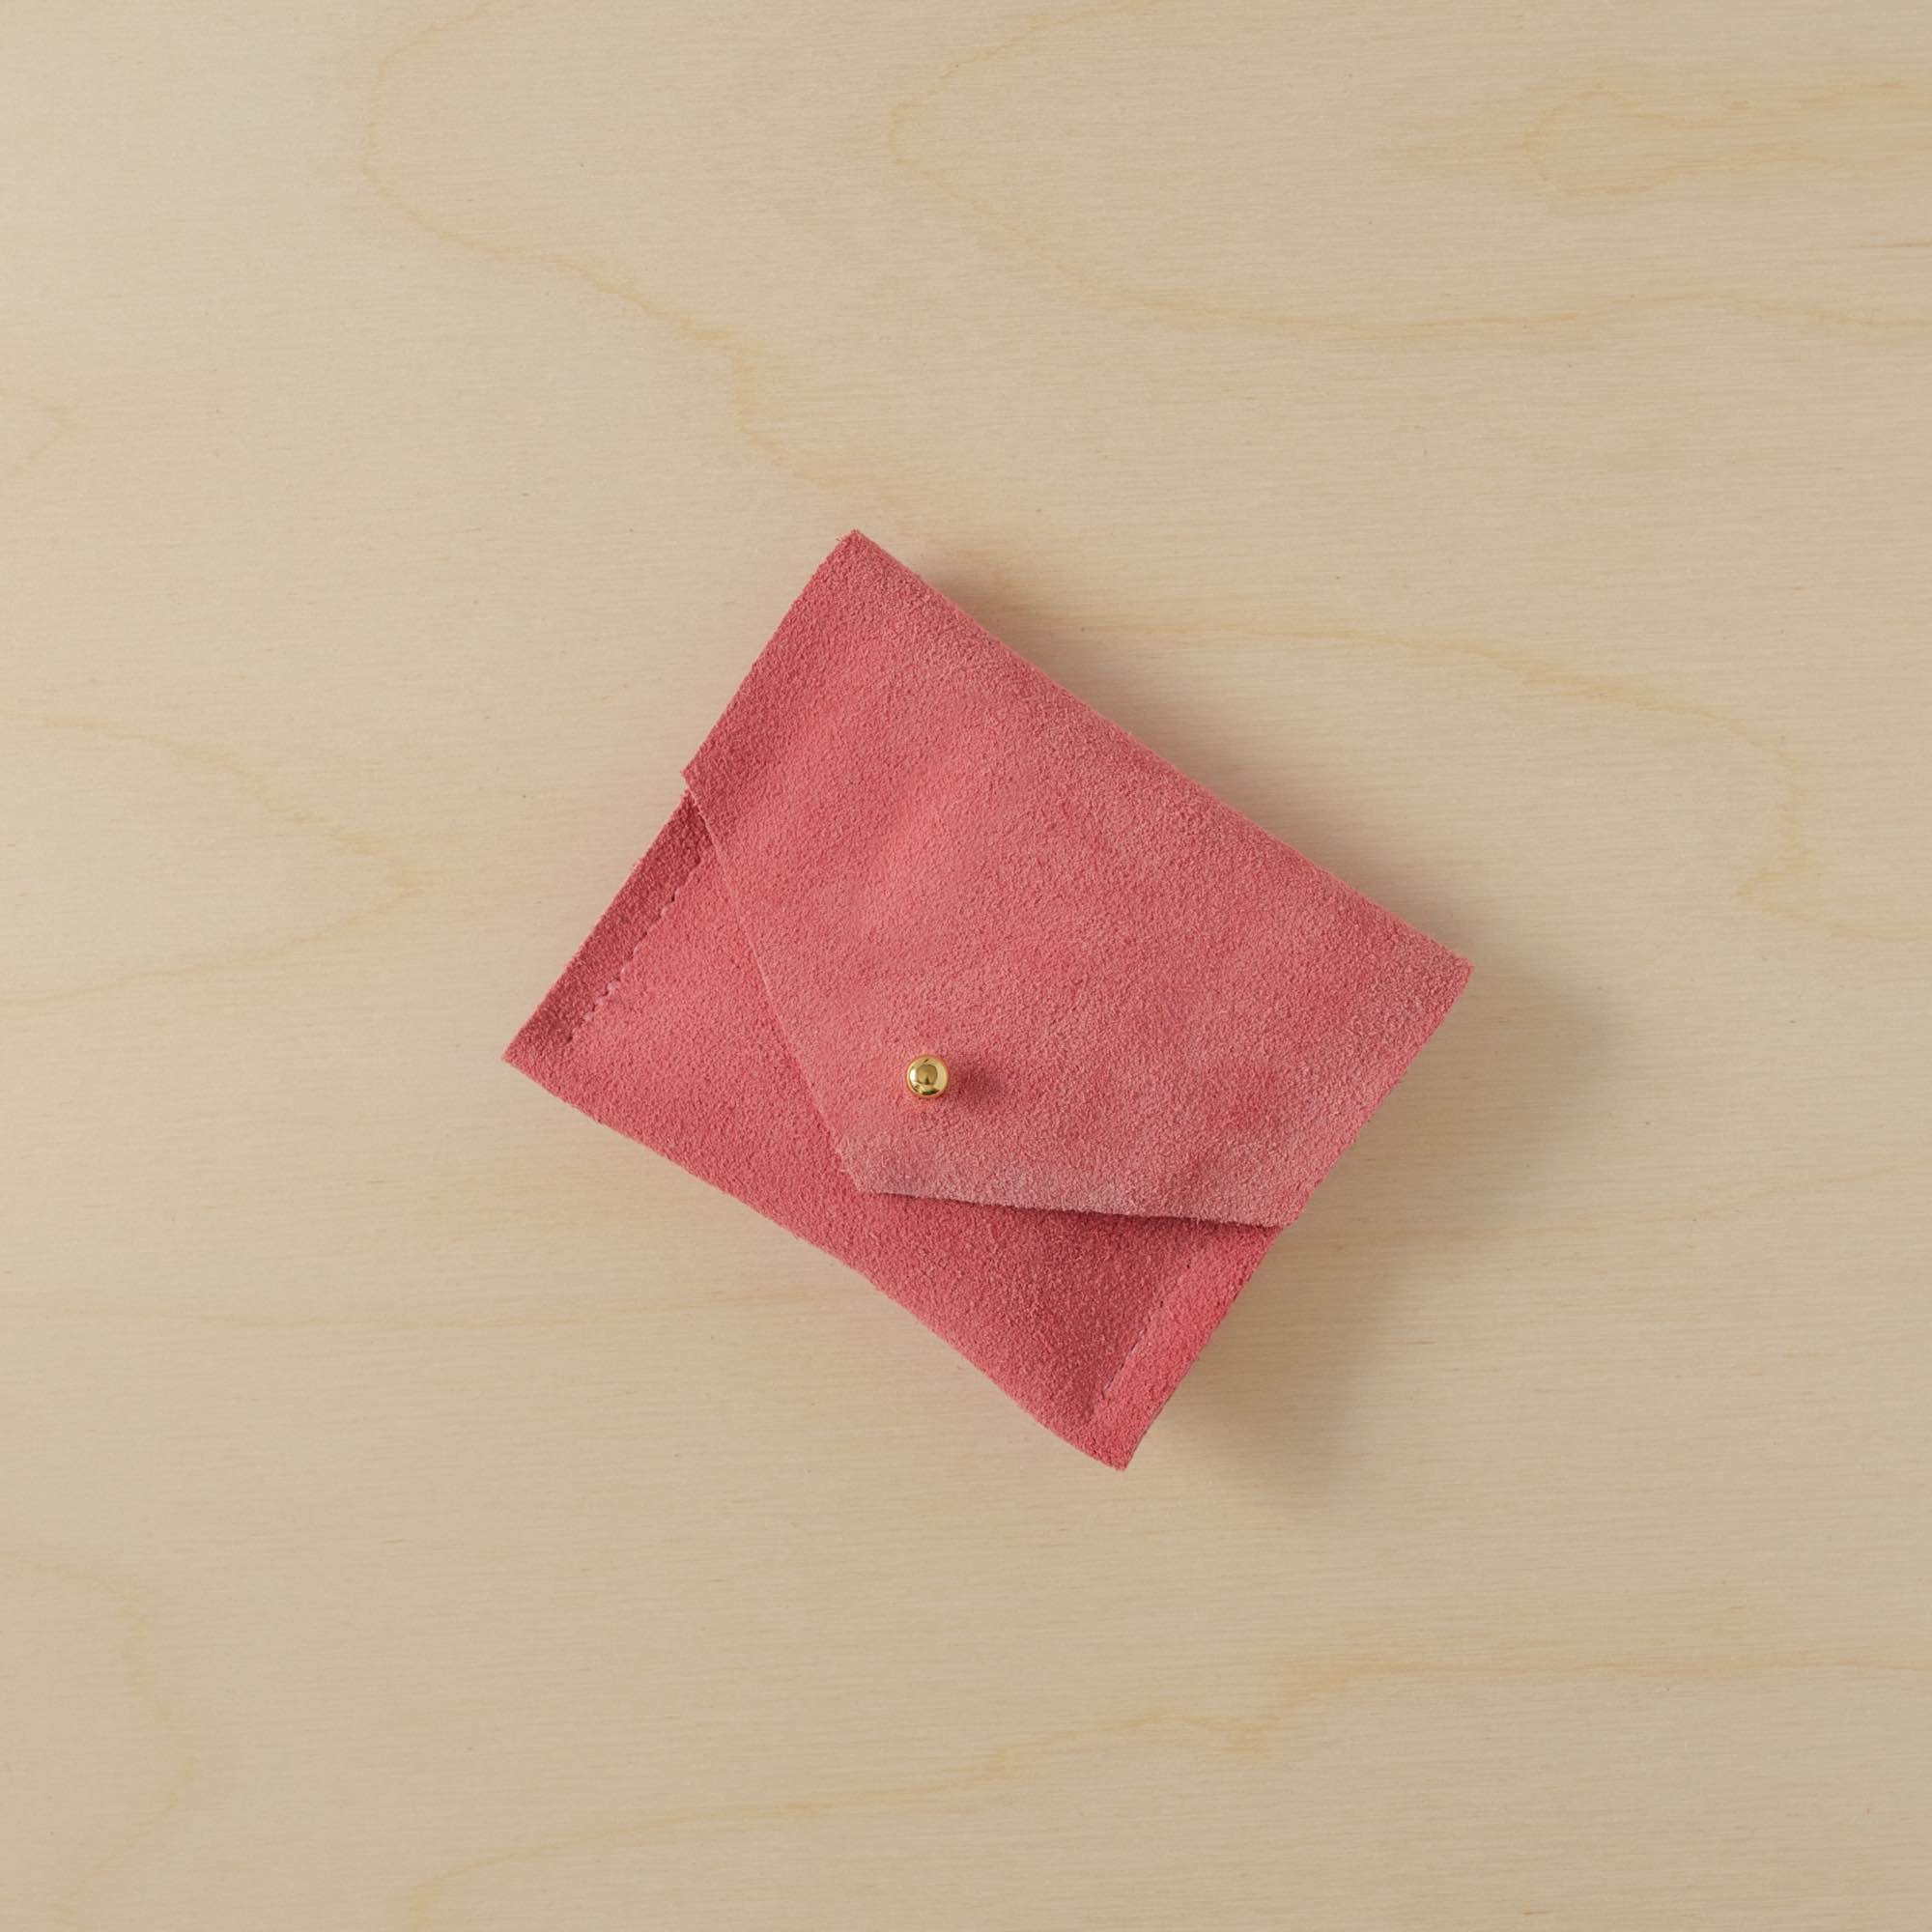 A suede Stitch Markers pouch in Coral Pink. Complete with a stud for secure closing.